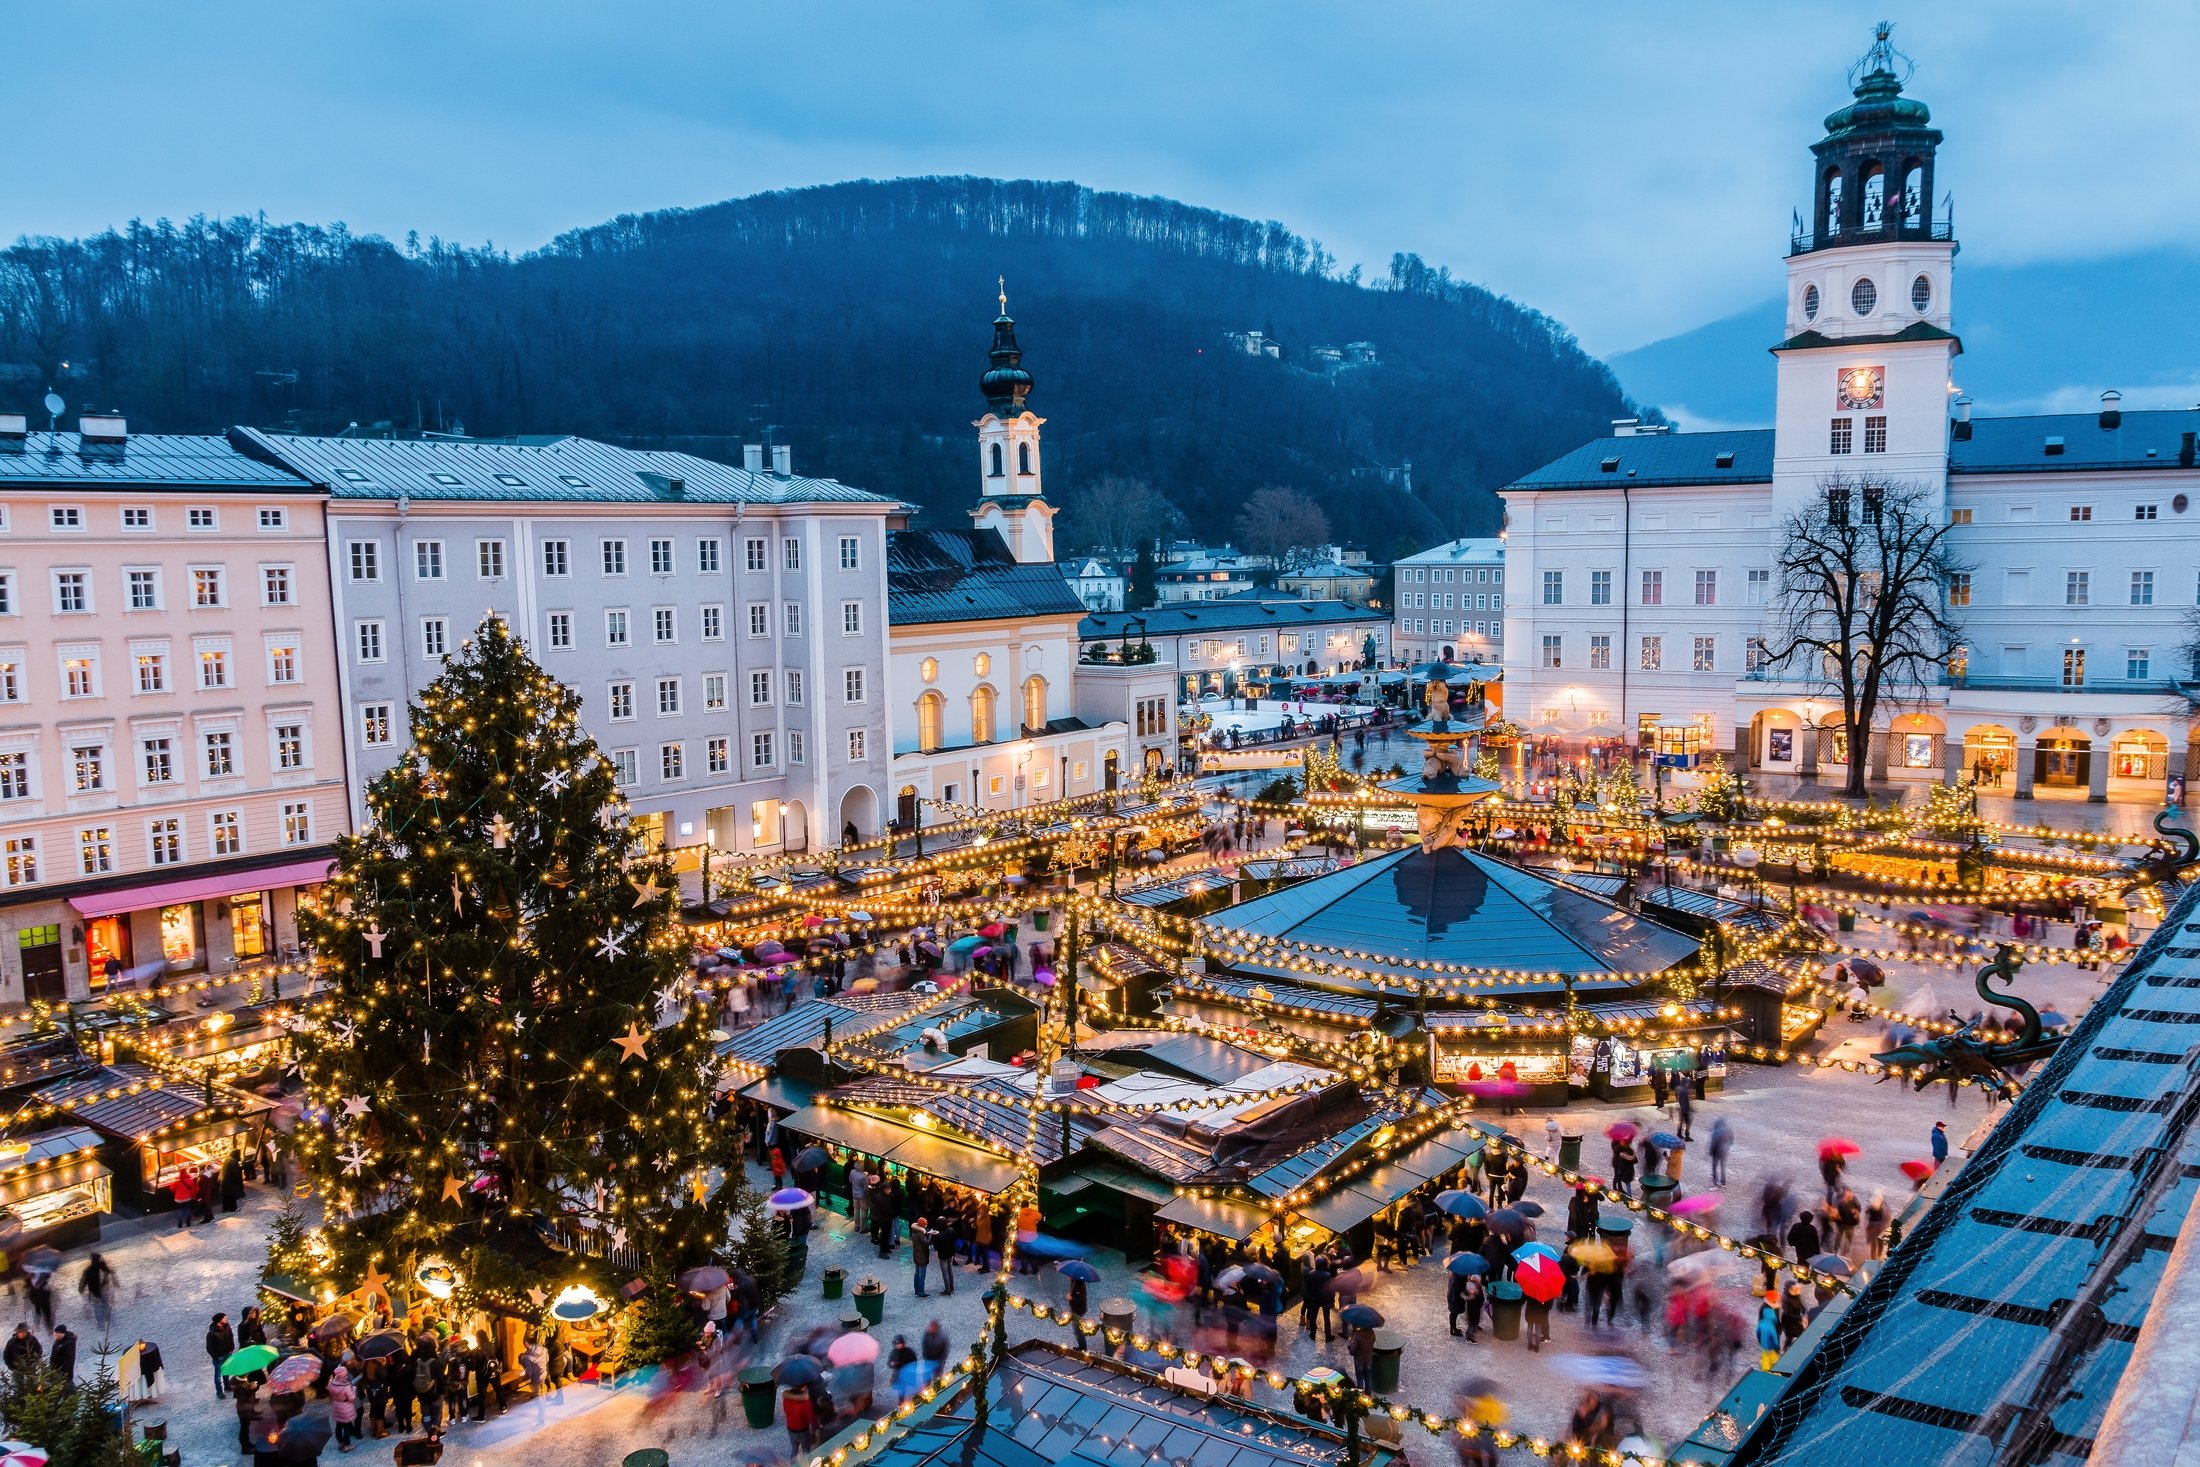 A Christmas market in the old town, in Salzburg, Austria. (Shutterstock Photo)